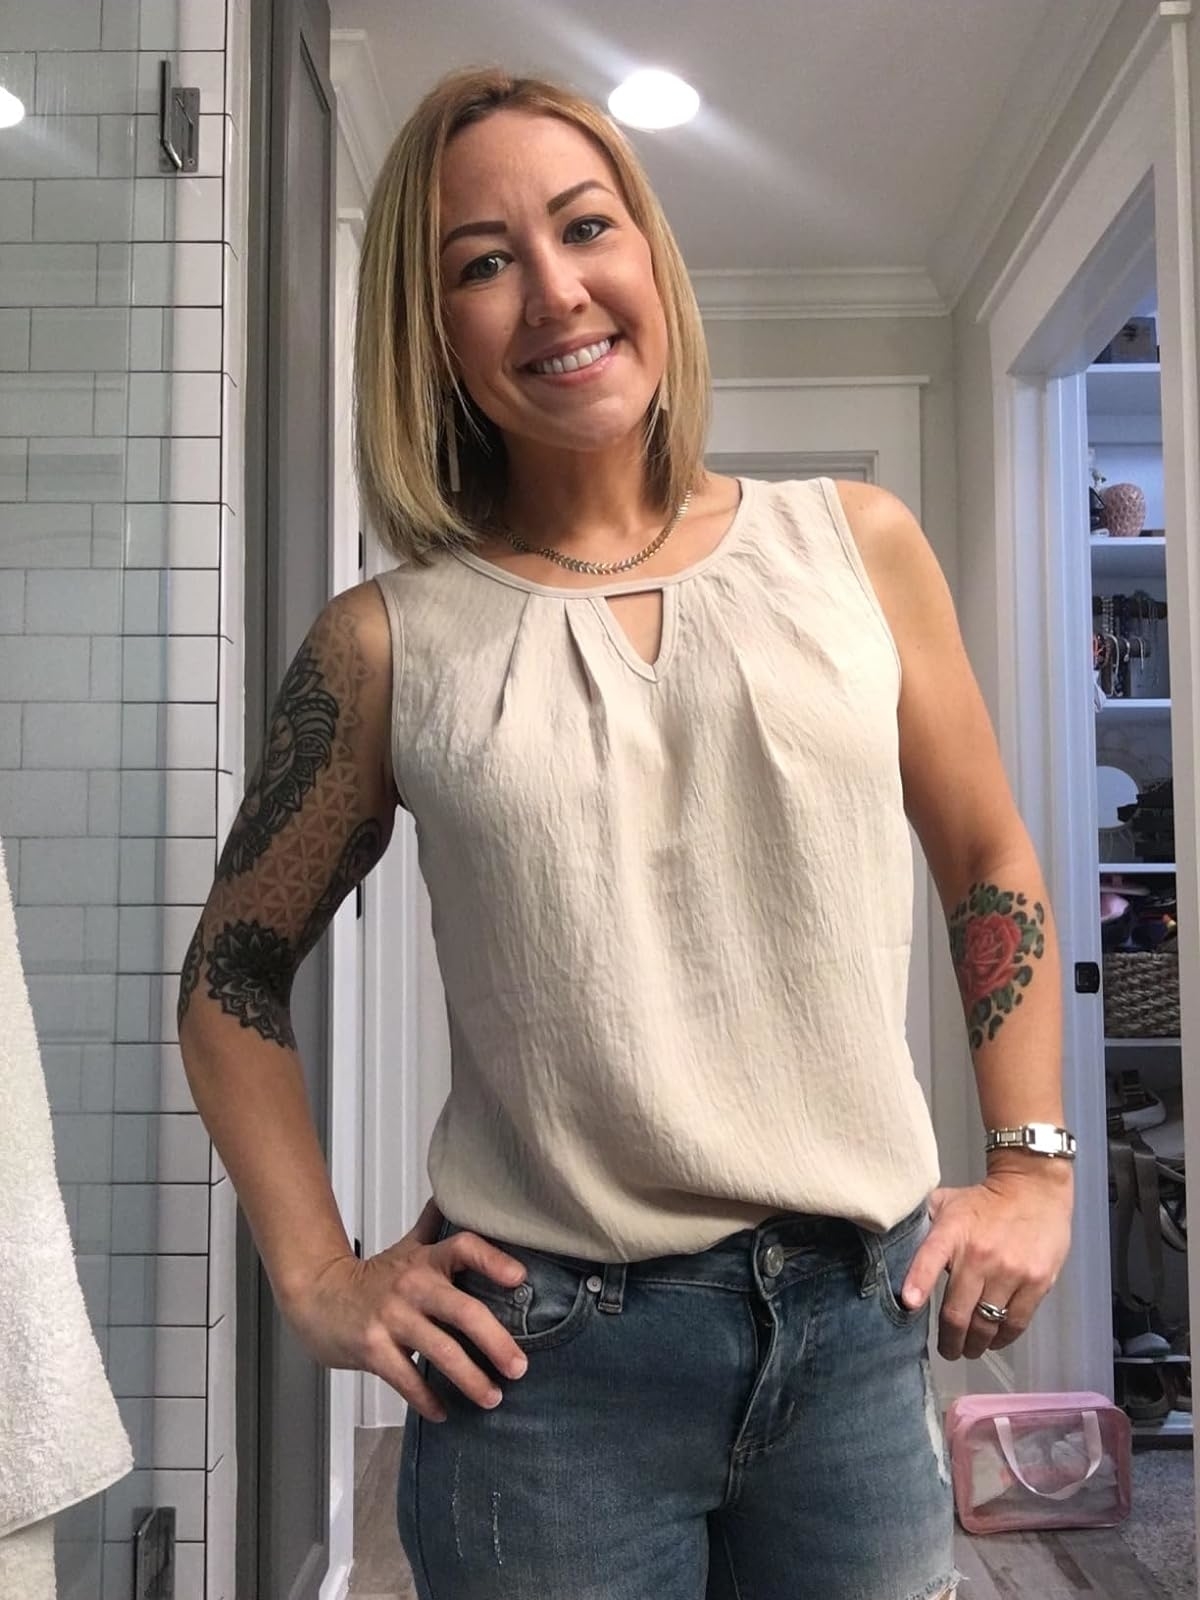 A reviewer with tattoos on both arms smiles while wearing a sleeveless top and jeans, standing in a bathroom